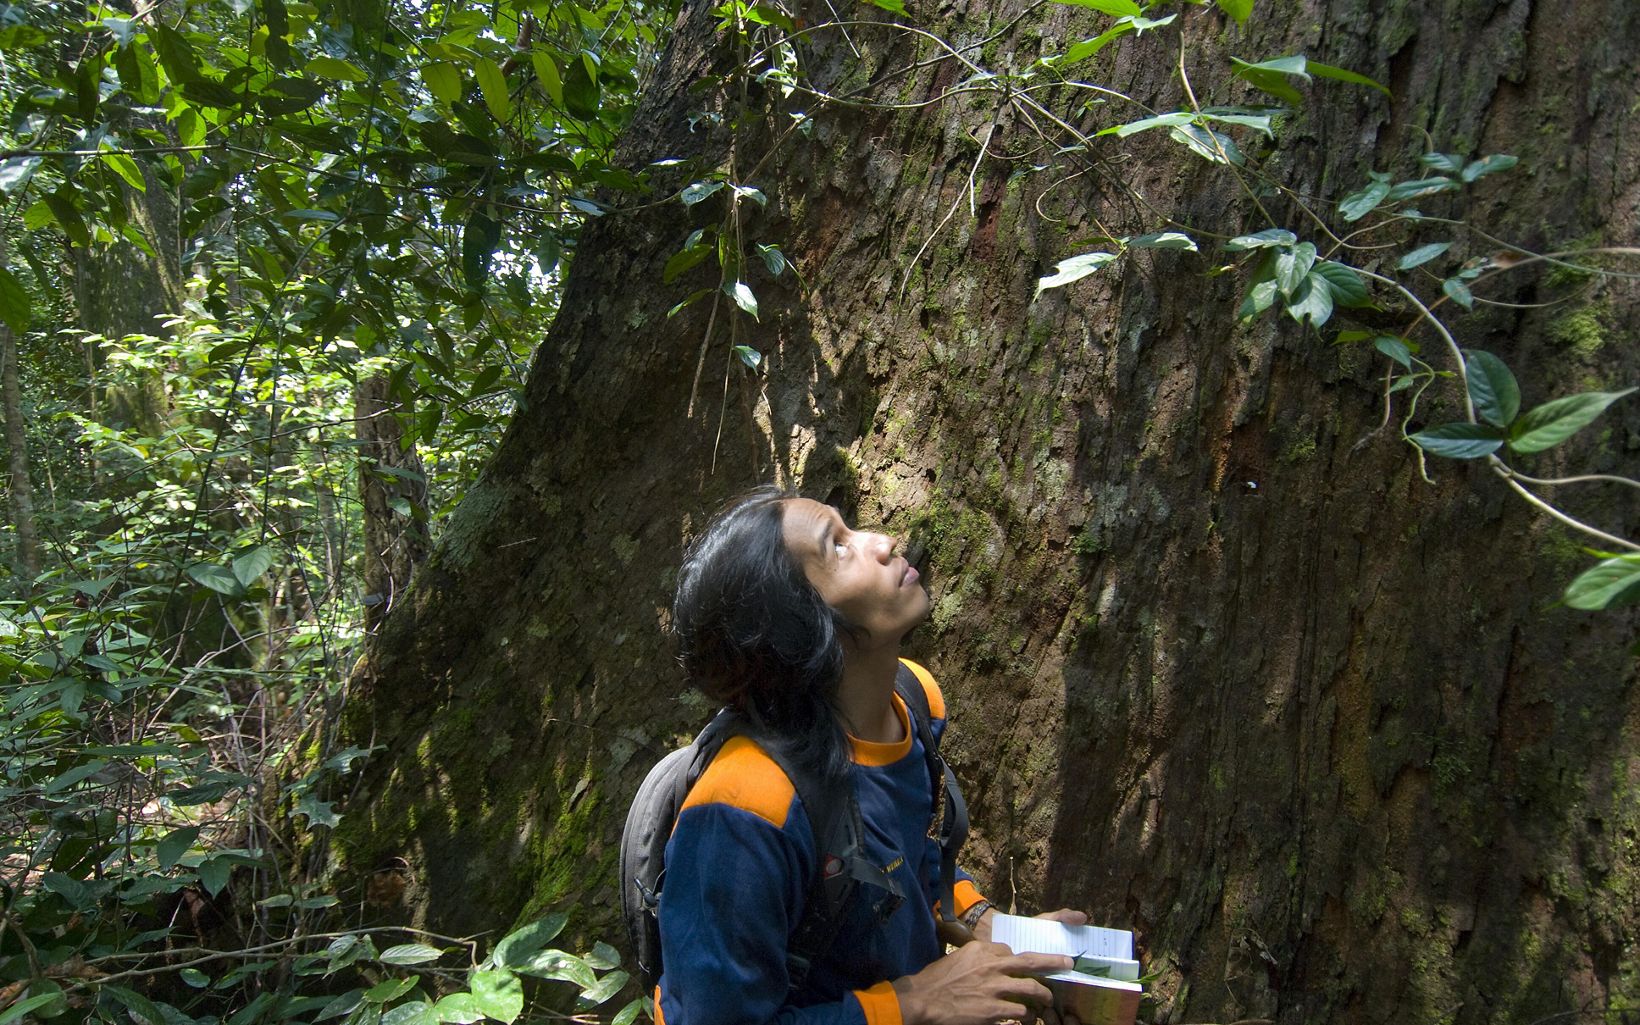 
                
                  Continuing Forest Research Forest guard Lebin Yen examining flora and fauna in the Wehea forest of Kalimanta, Borneo, Indonesia.
                  © Bridget Besaw
                
              